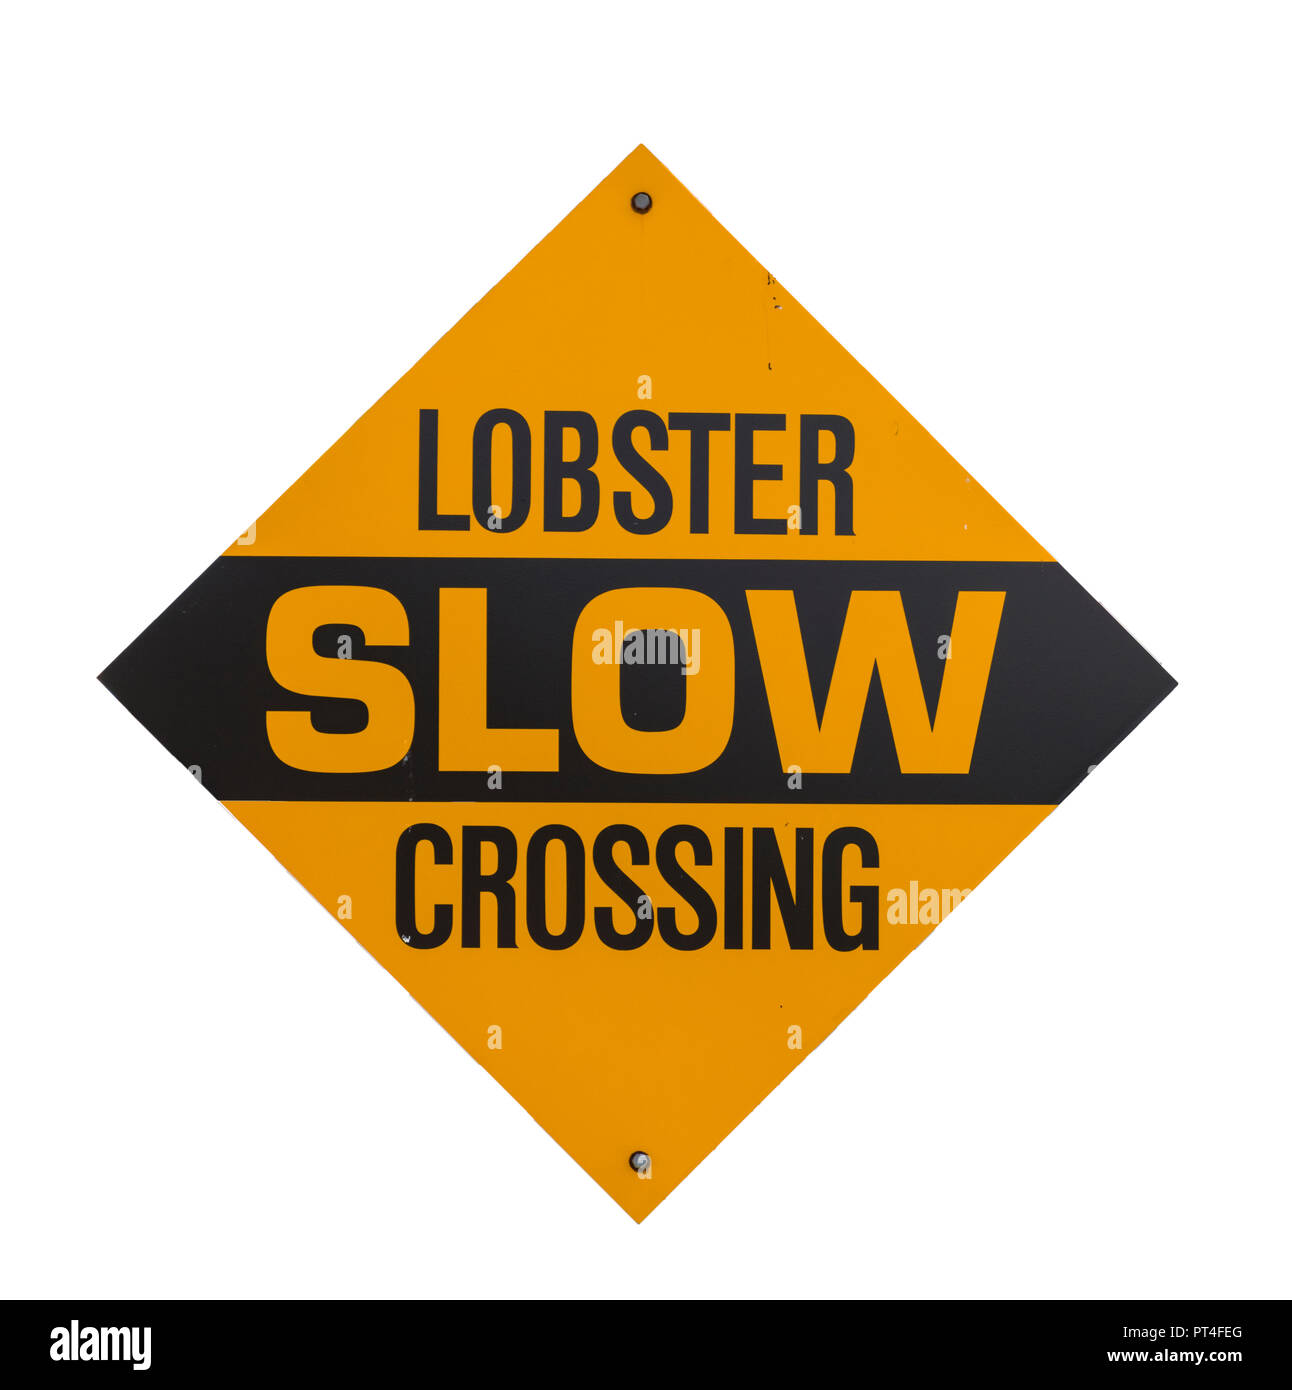 Lobster Crossing Slow sign against a white background Stock Photo